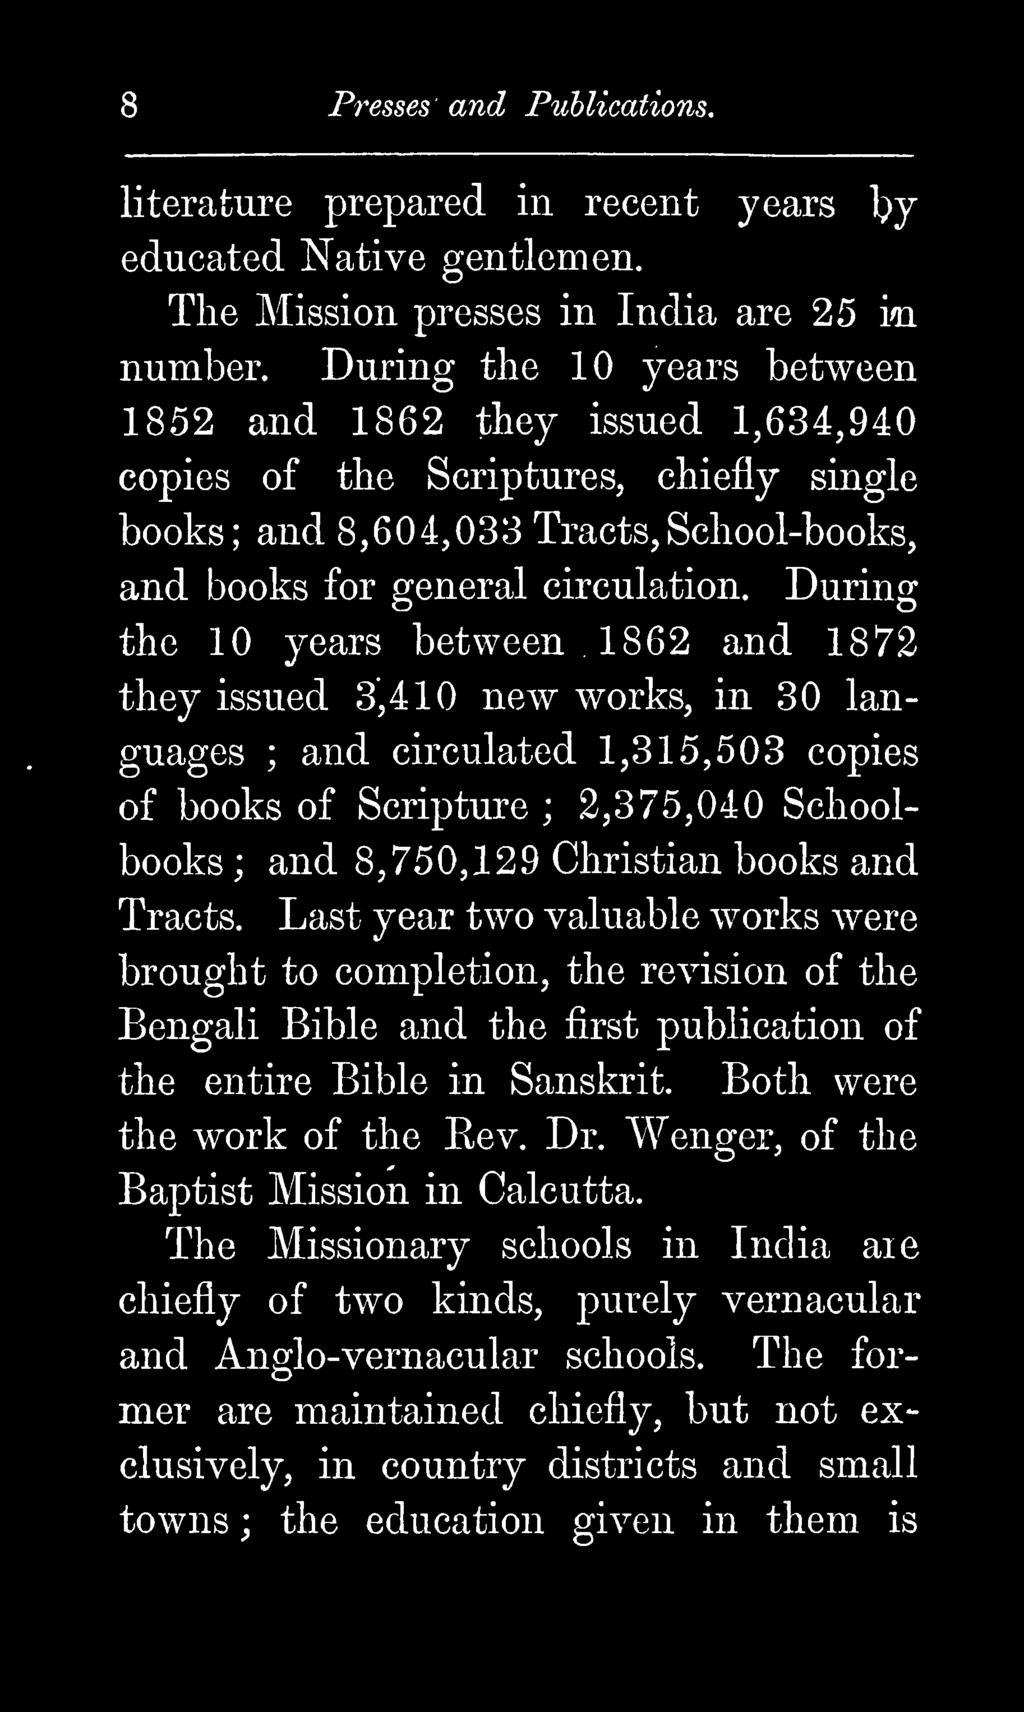 During the 10 years between 1862 and 1872 they issued 3,410 new works, in 30 languages ; and circulated 1,315,503 copies of books of Scripture ; 2,375,040 Schoolbooks ; Tracts.